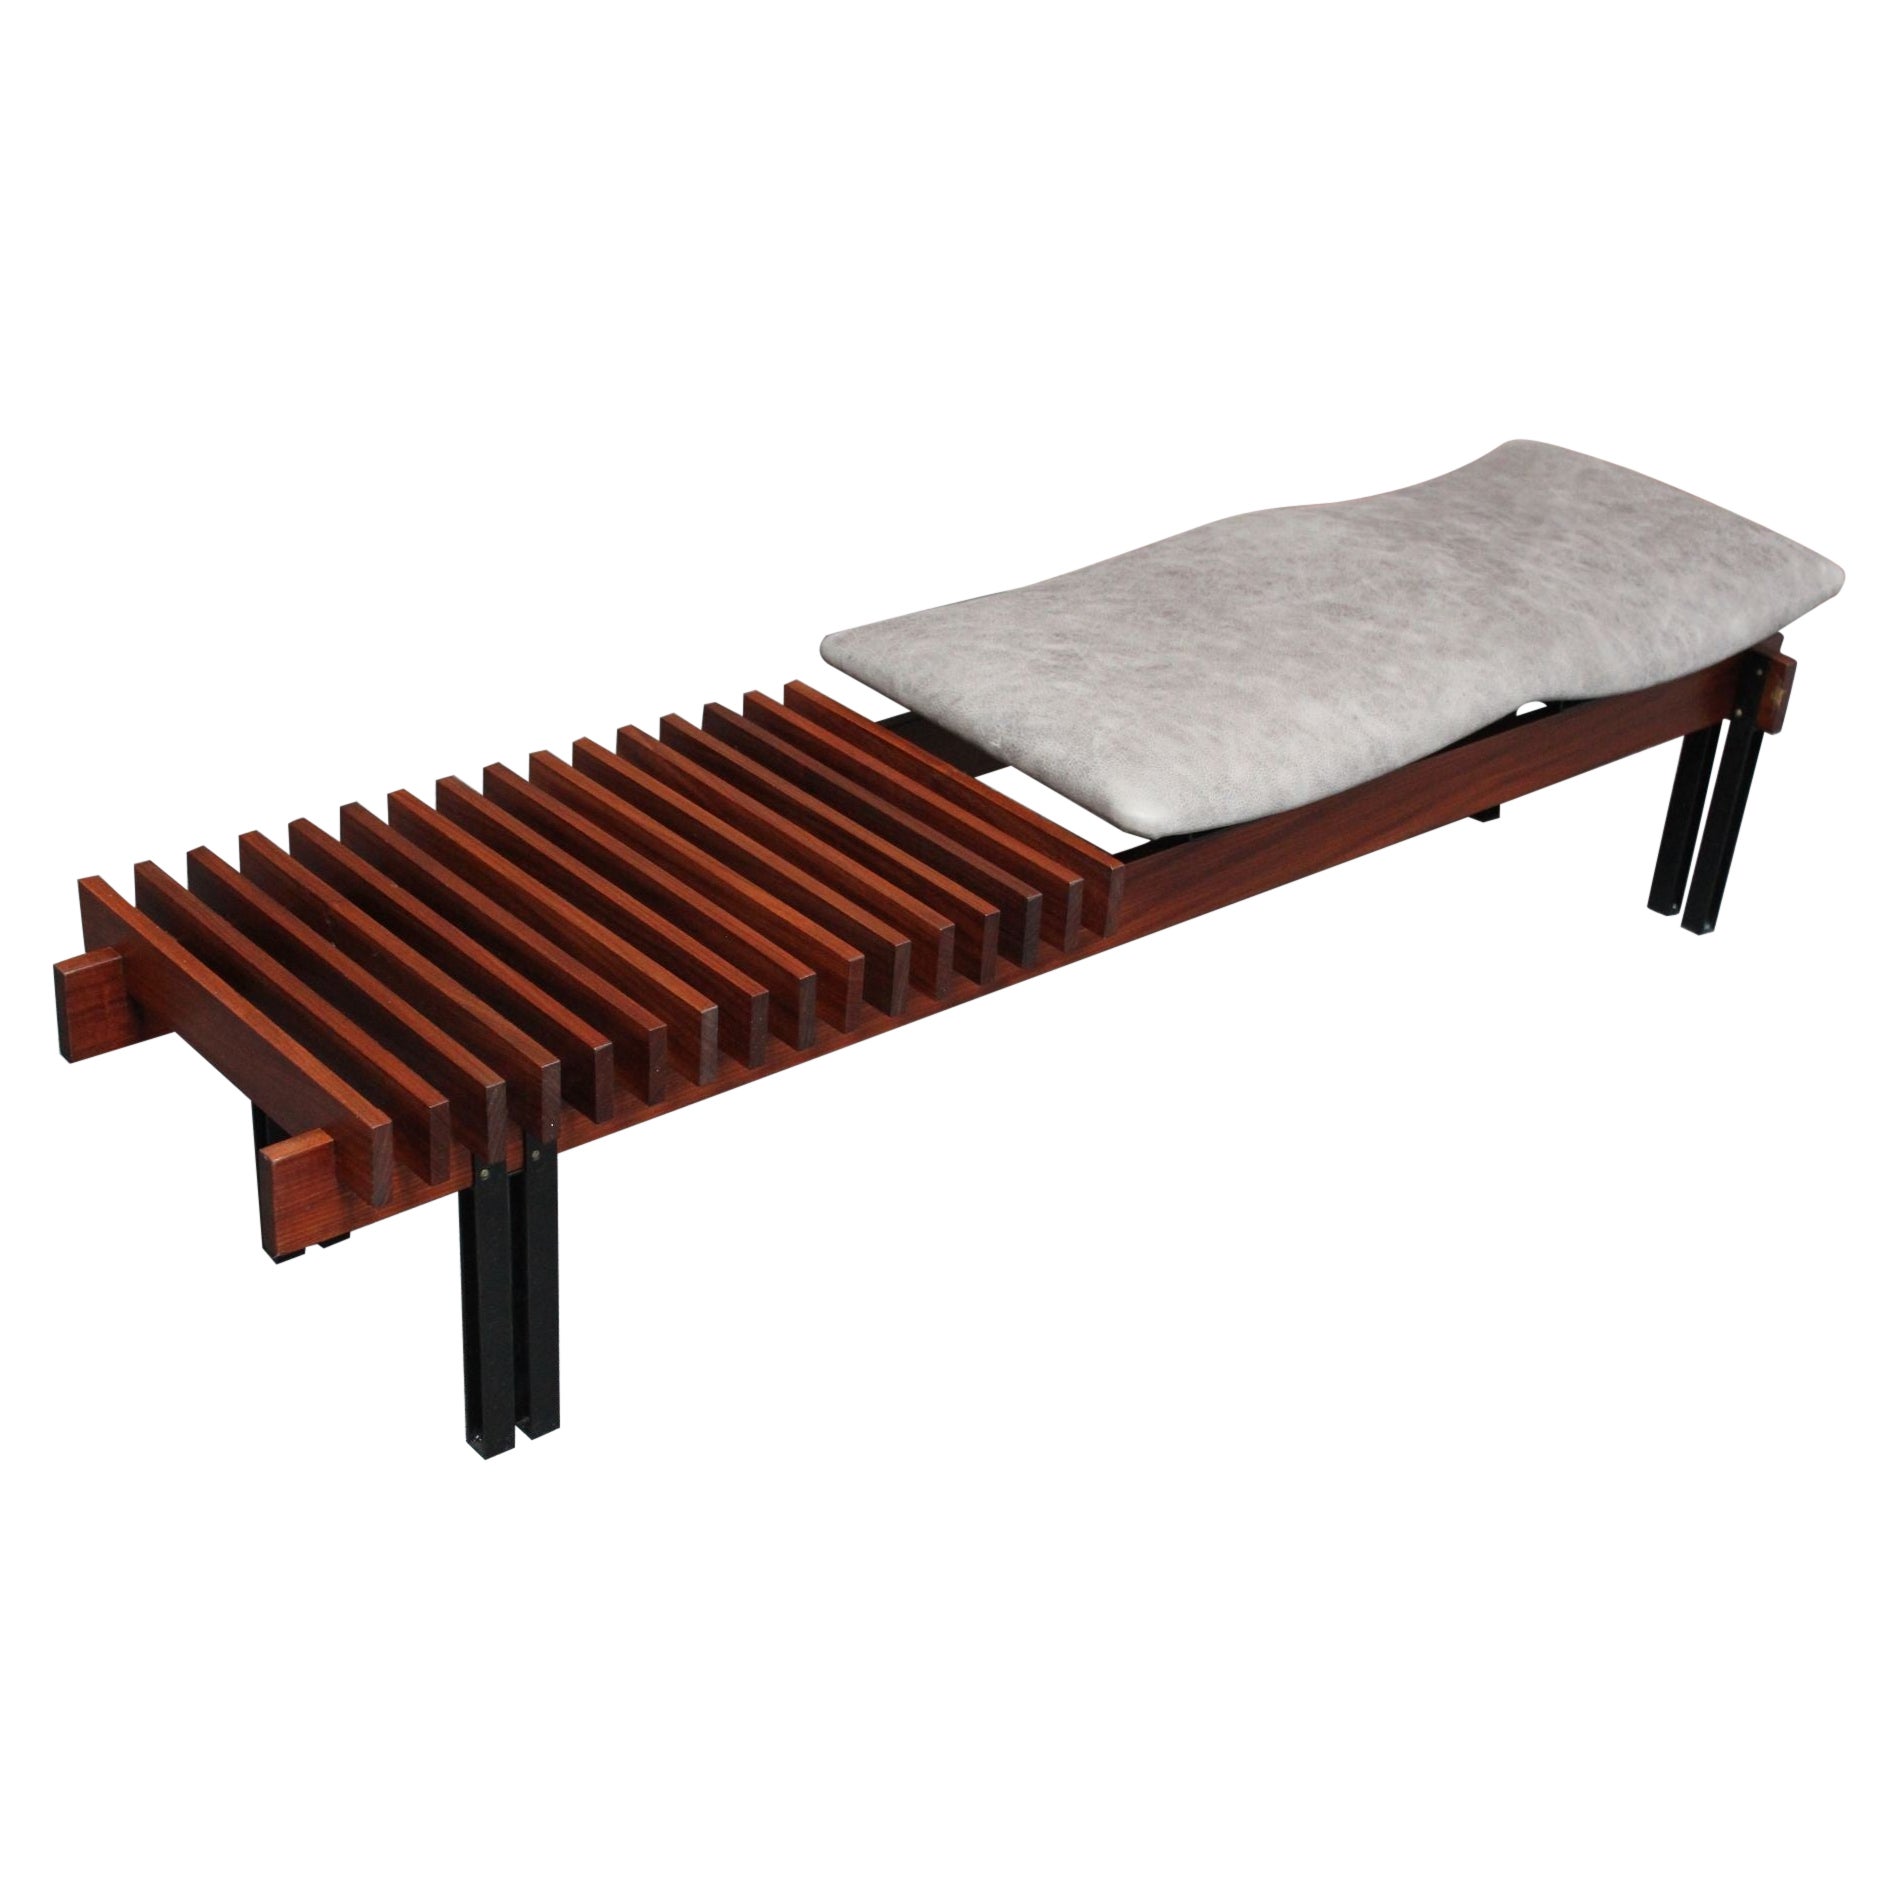 Italian Modernist Teak and Leather Bench by Inge and Luciano Rubino